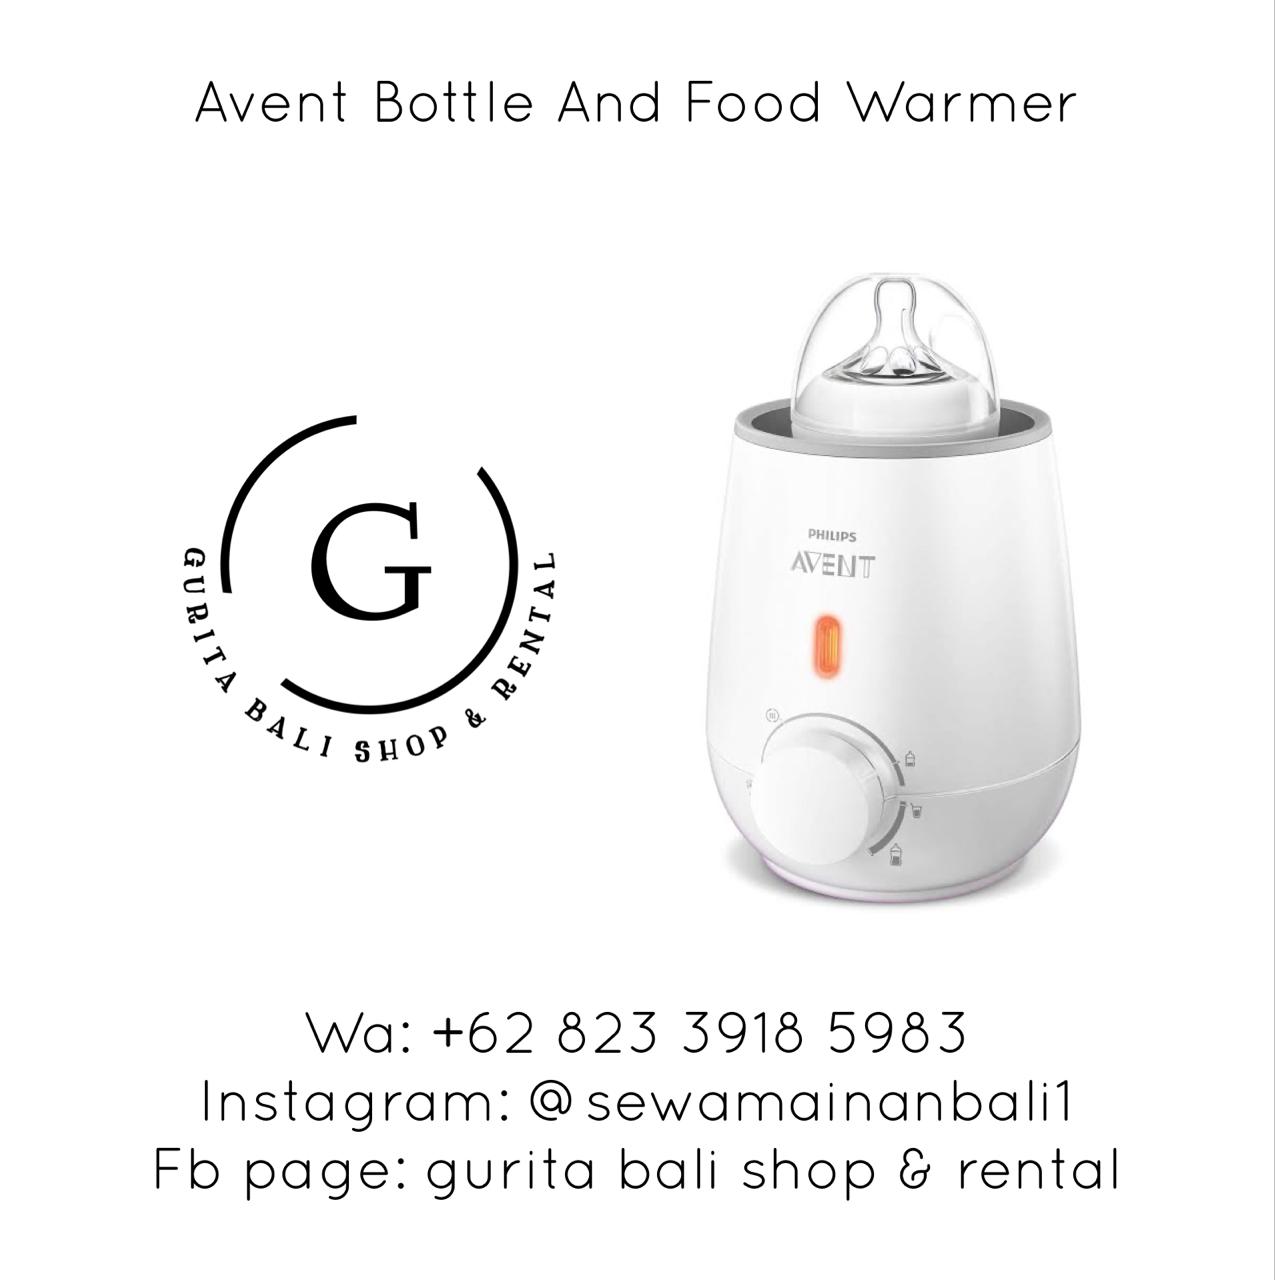 AVENT BOTTLE AND FOOD WARMER